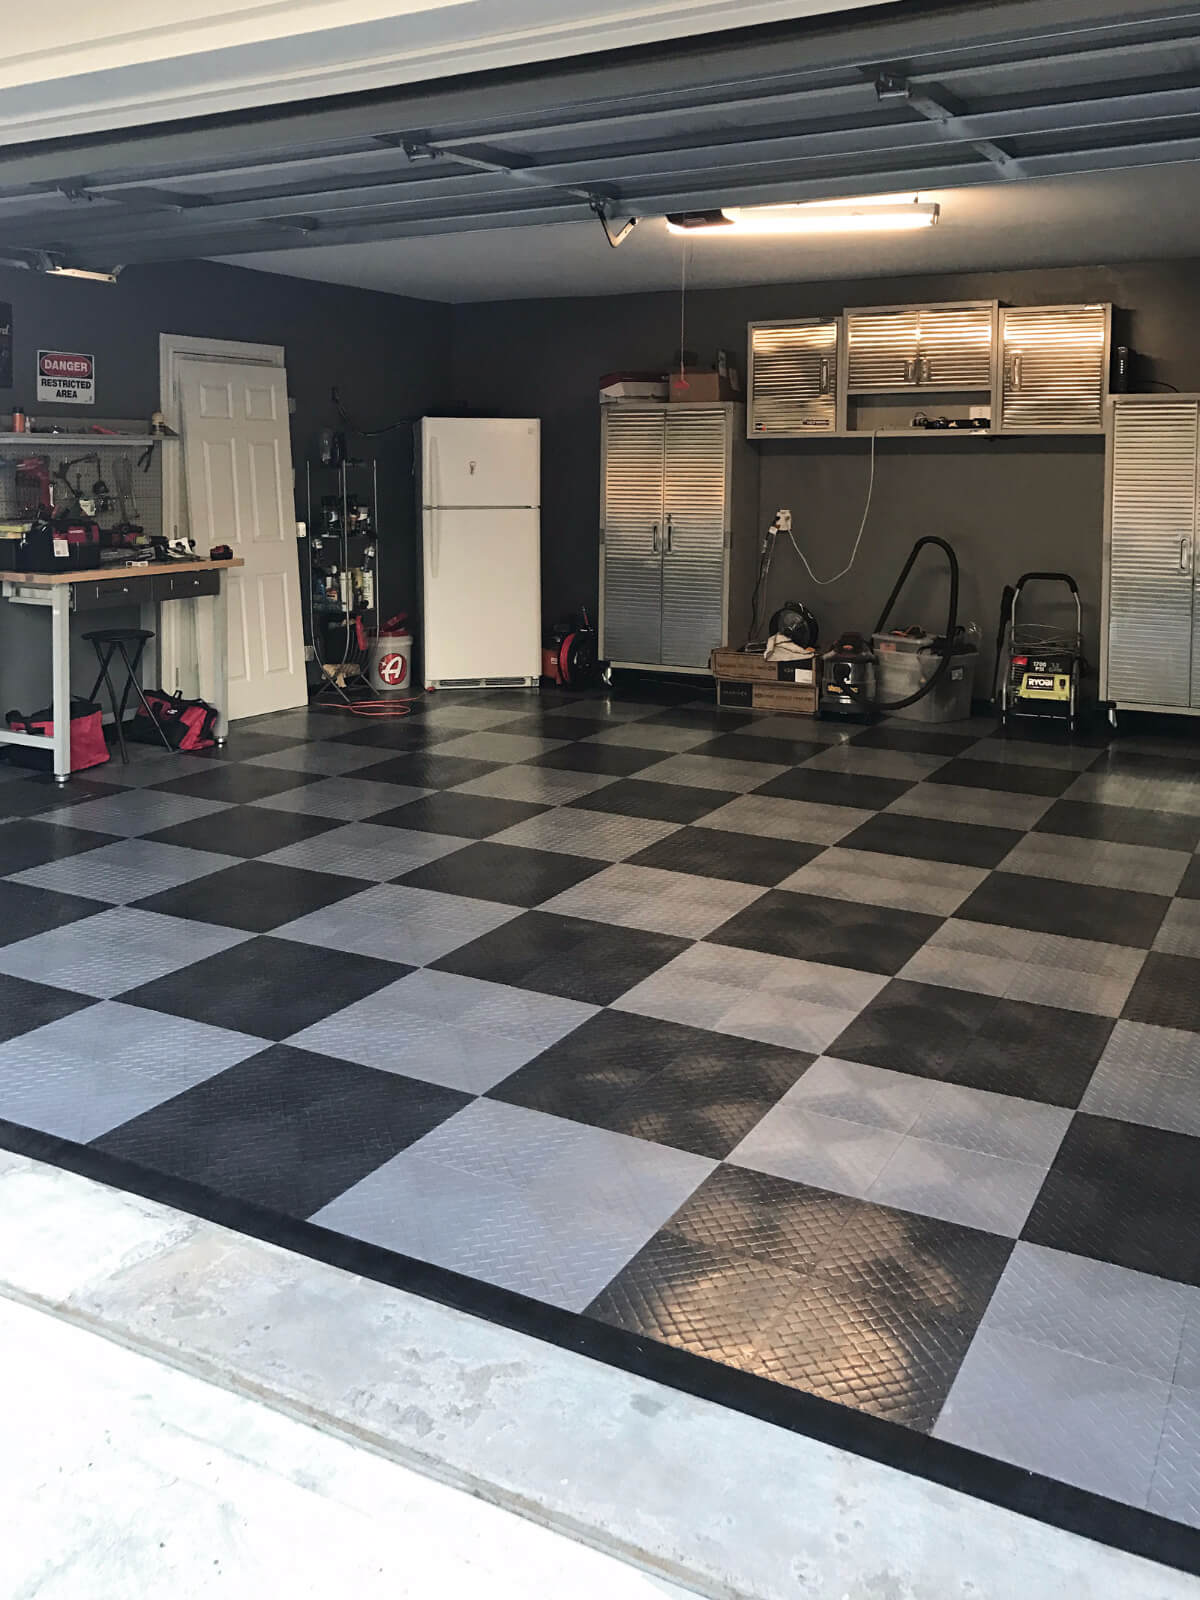 RaceDeck Diamond in graphite and alloy complement the silver cabinets in this garage.